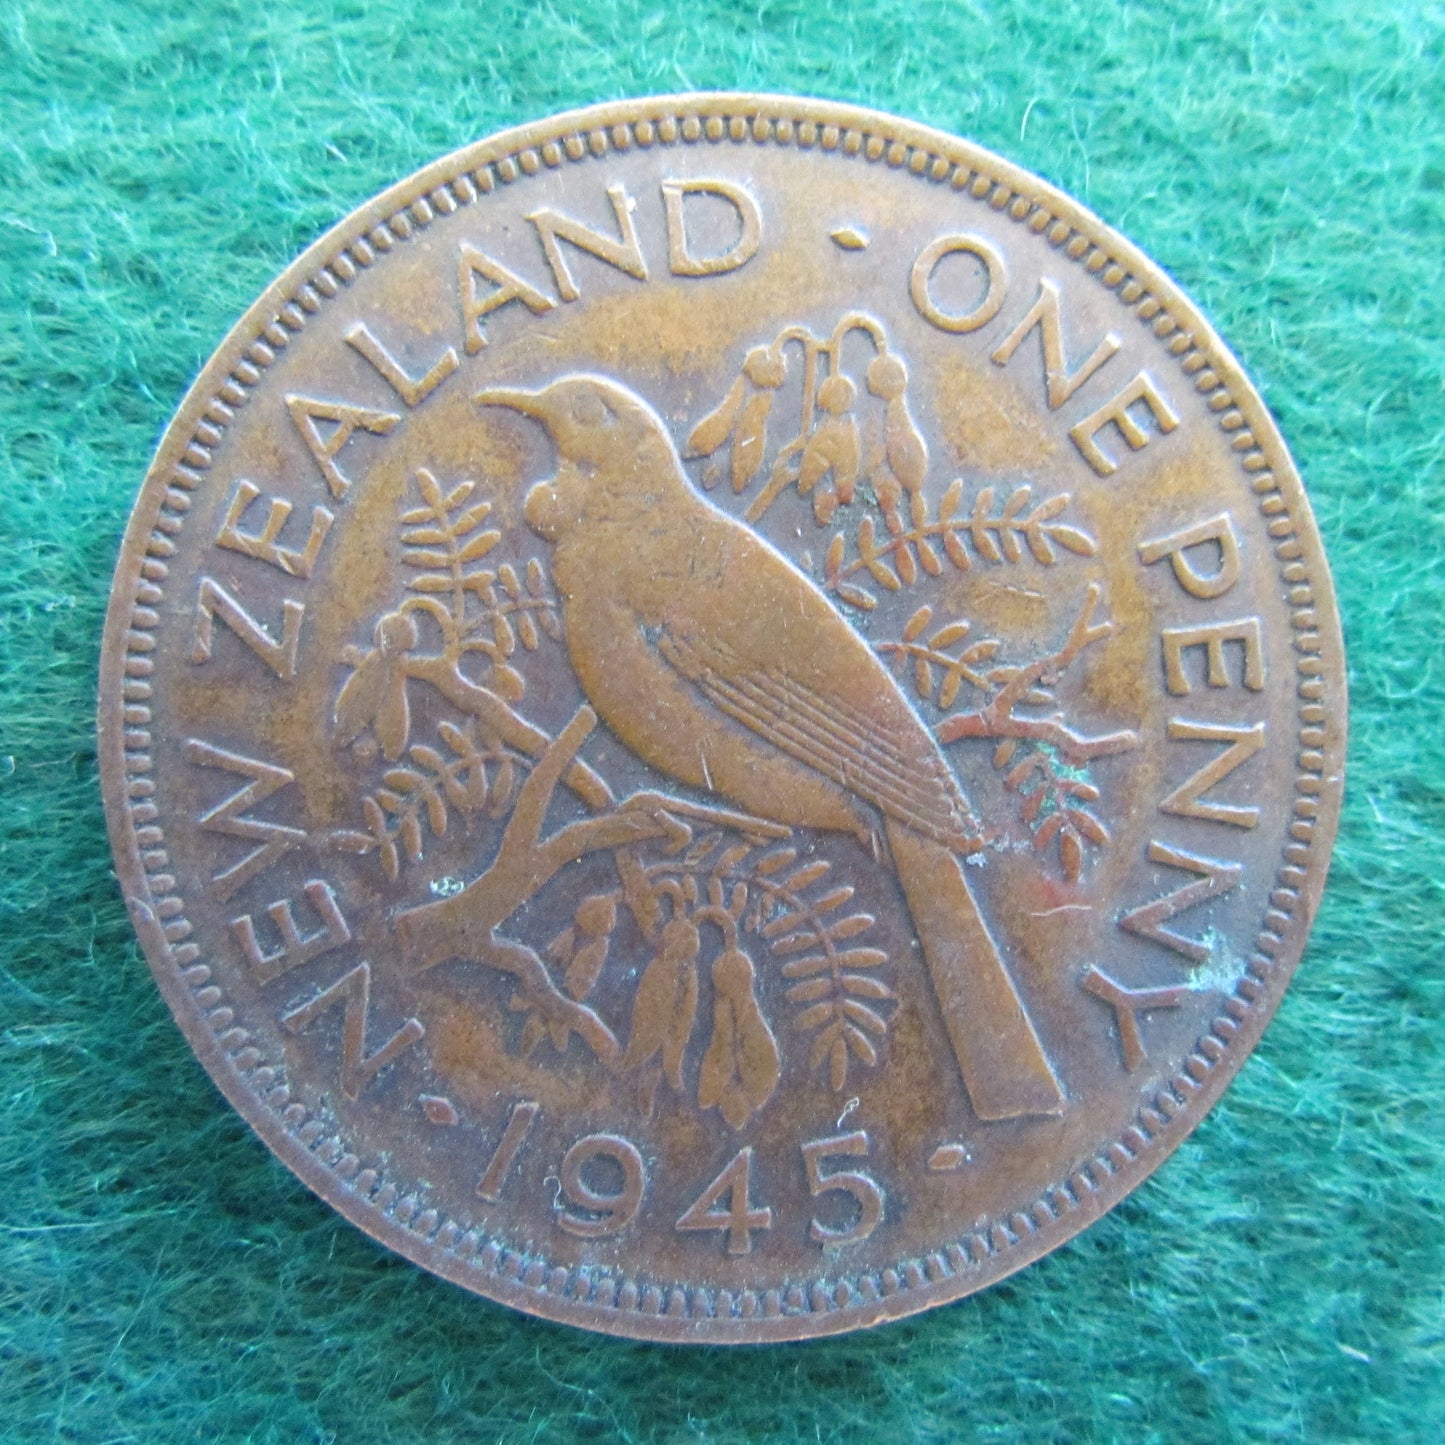 New Zealand 1945 Penny King George VI Coin